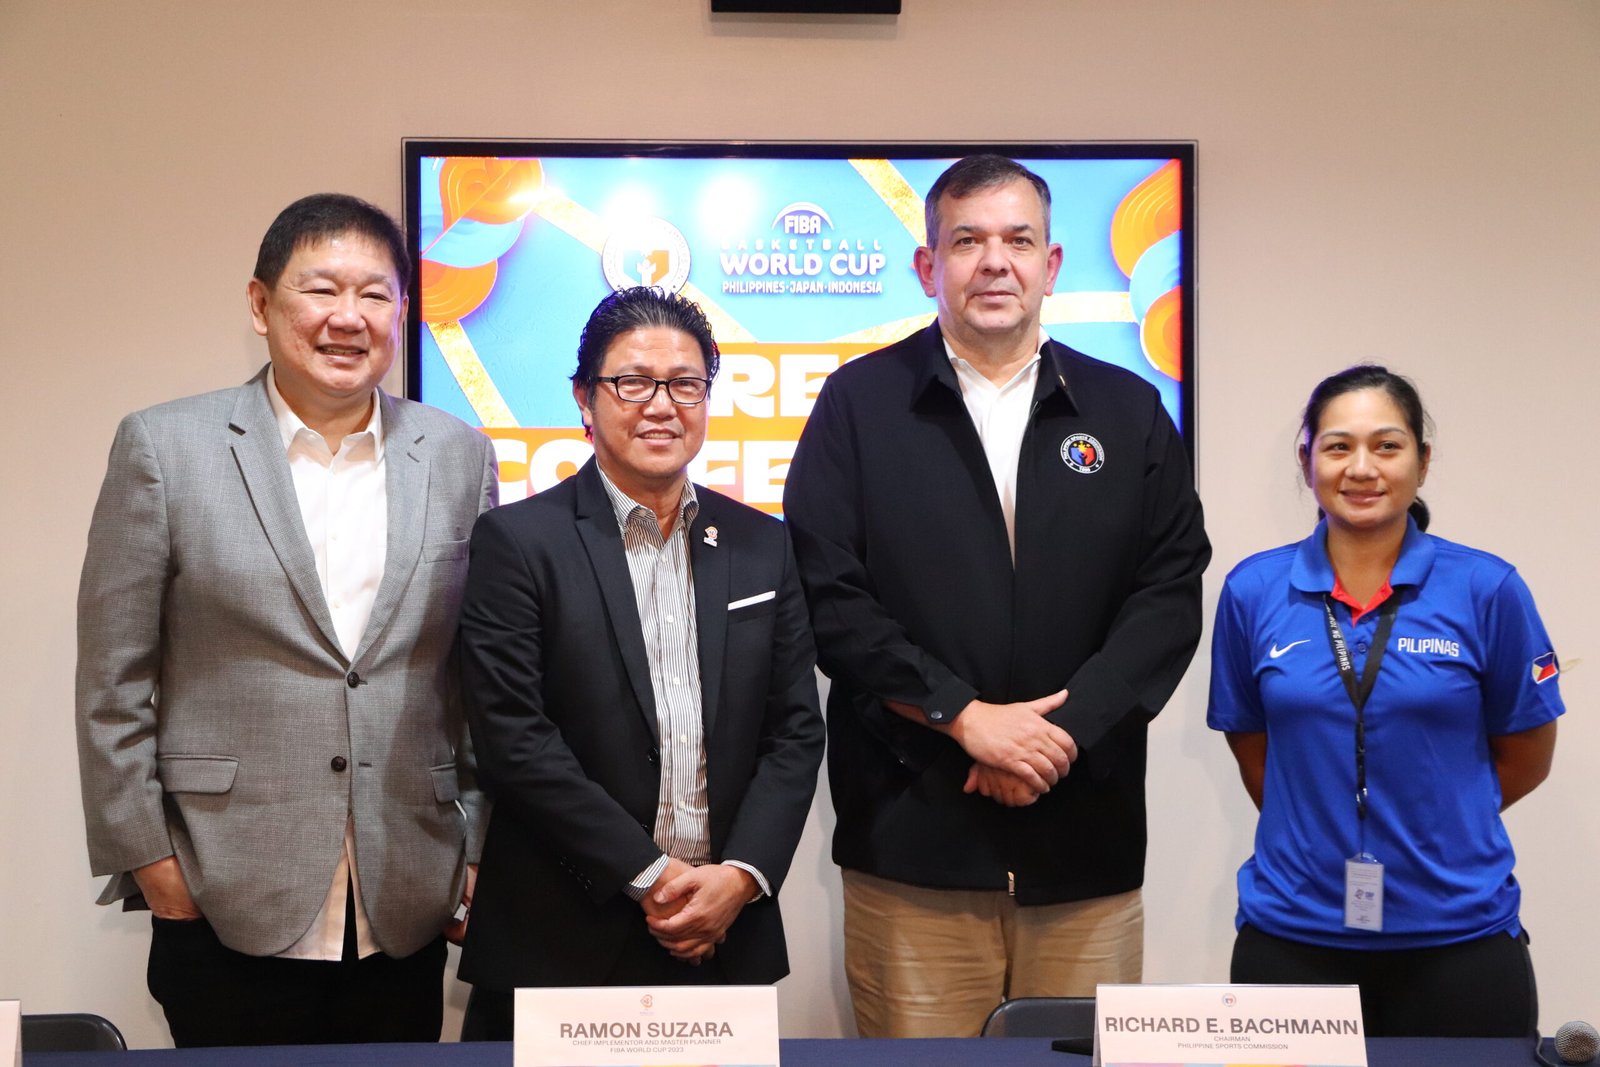 (L-R) FIBAWC 2023 Joint Management Committee Head John Lucas, FIBAWC 2023 Chief Implementor & Master Planner Ramon Suzara, Philippine Sports Commission Chairman Richard Bachmann and FIBAWC 2023 Deputy Event Director Erika Dy in the press conference for the FIBA Inter-Agency Meeting on Wednesday at Rizal Memorial Sports Complex, Manila.